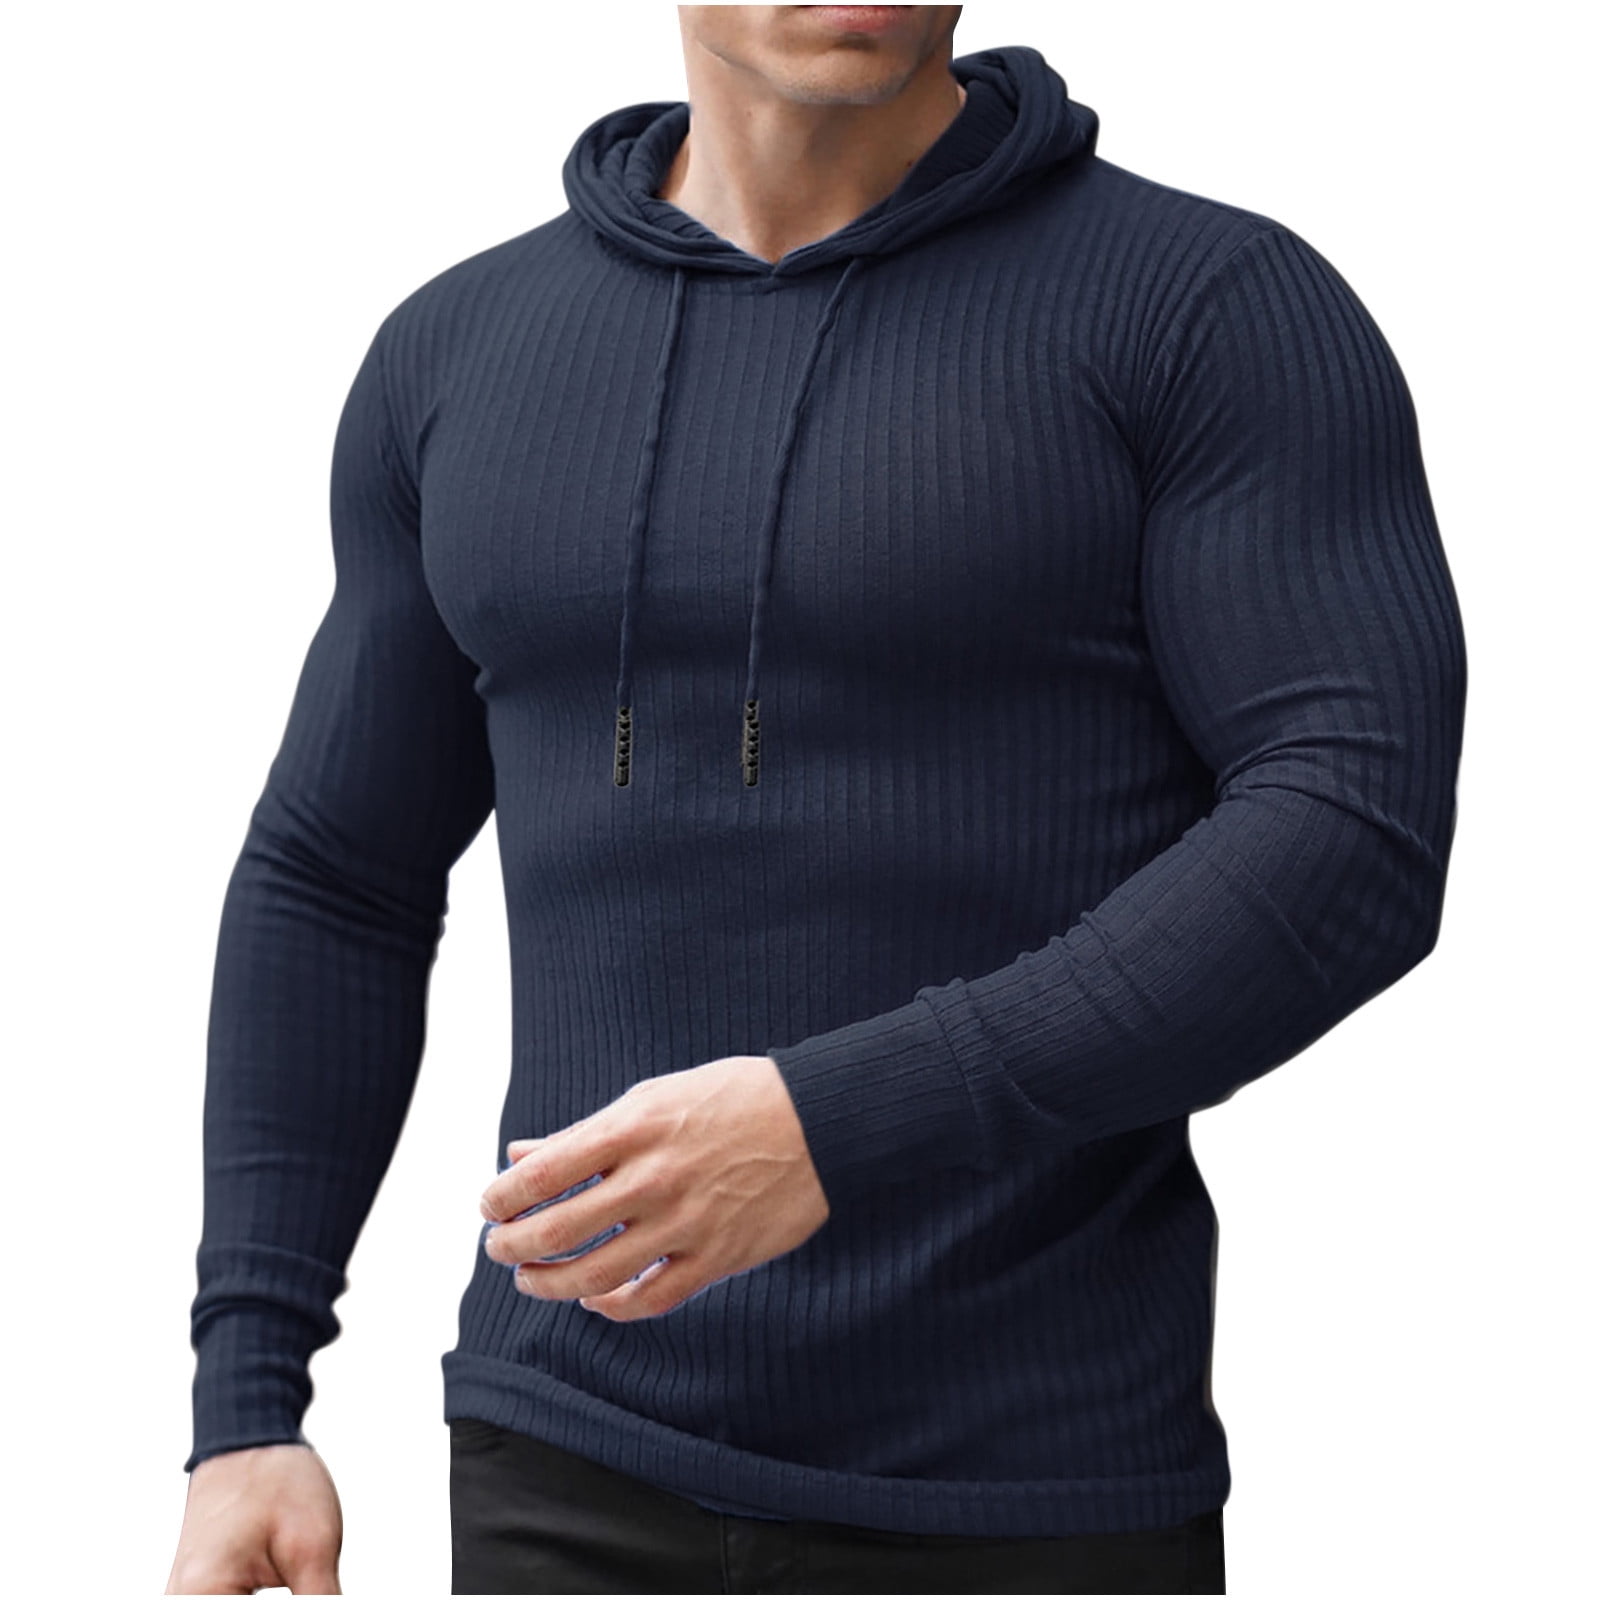 Levmjia Mens Long Sleeve Shirts Sale Men Casual Fashion Solid Tight Fitting  Muscle Fitness Sports Hoodie Pullover Long Sleeved Sweatshirts 